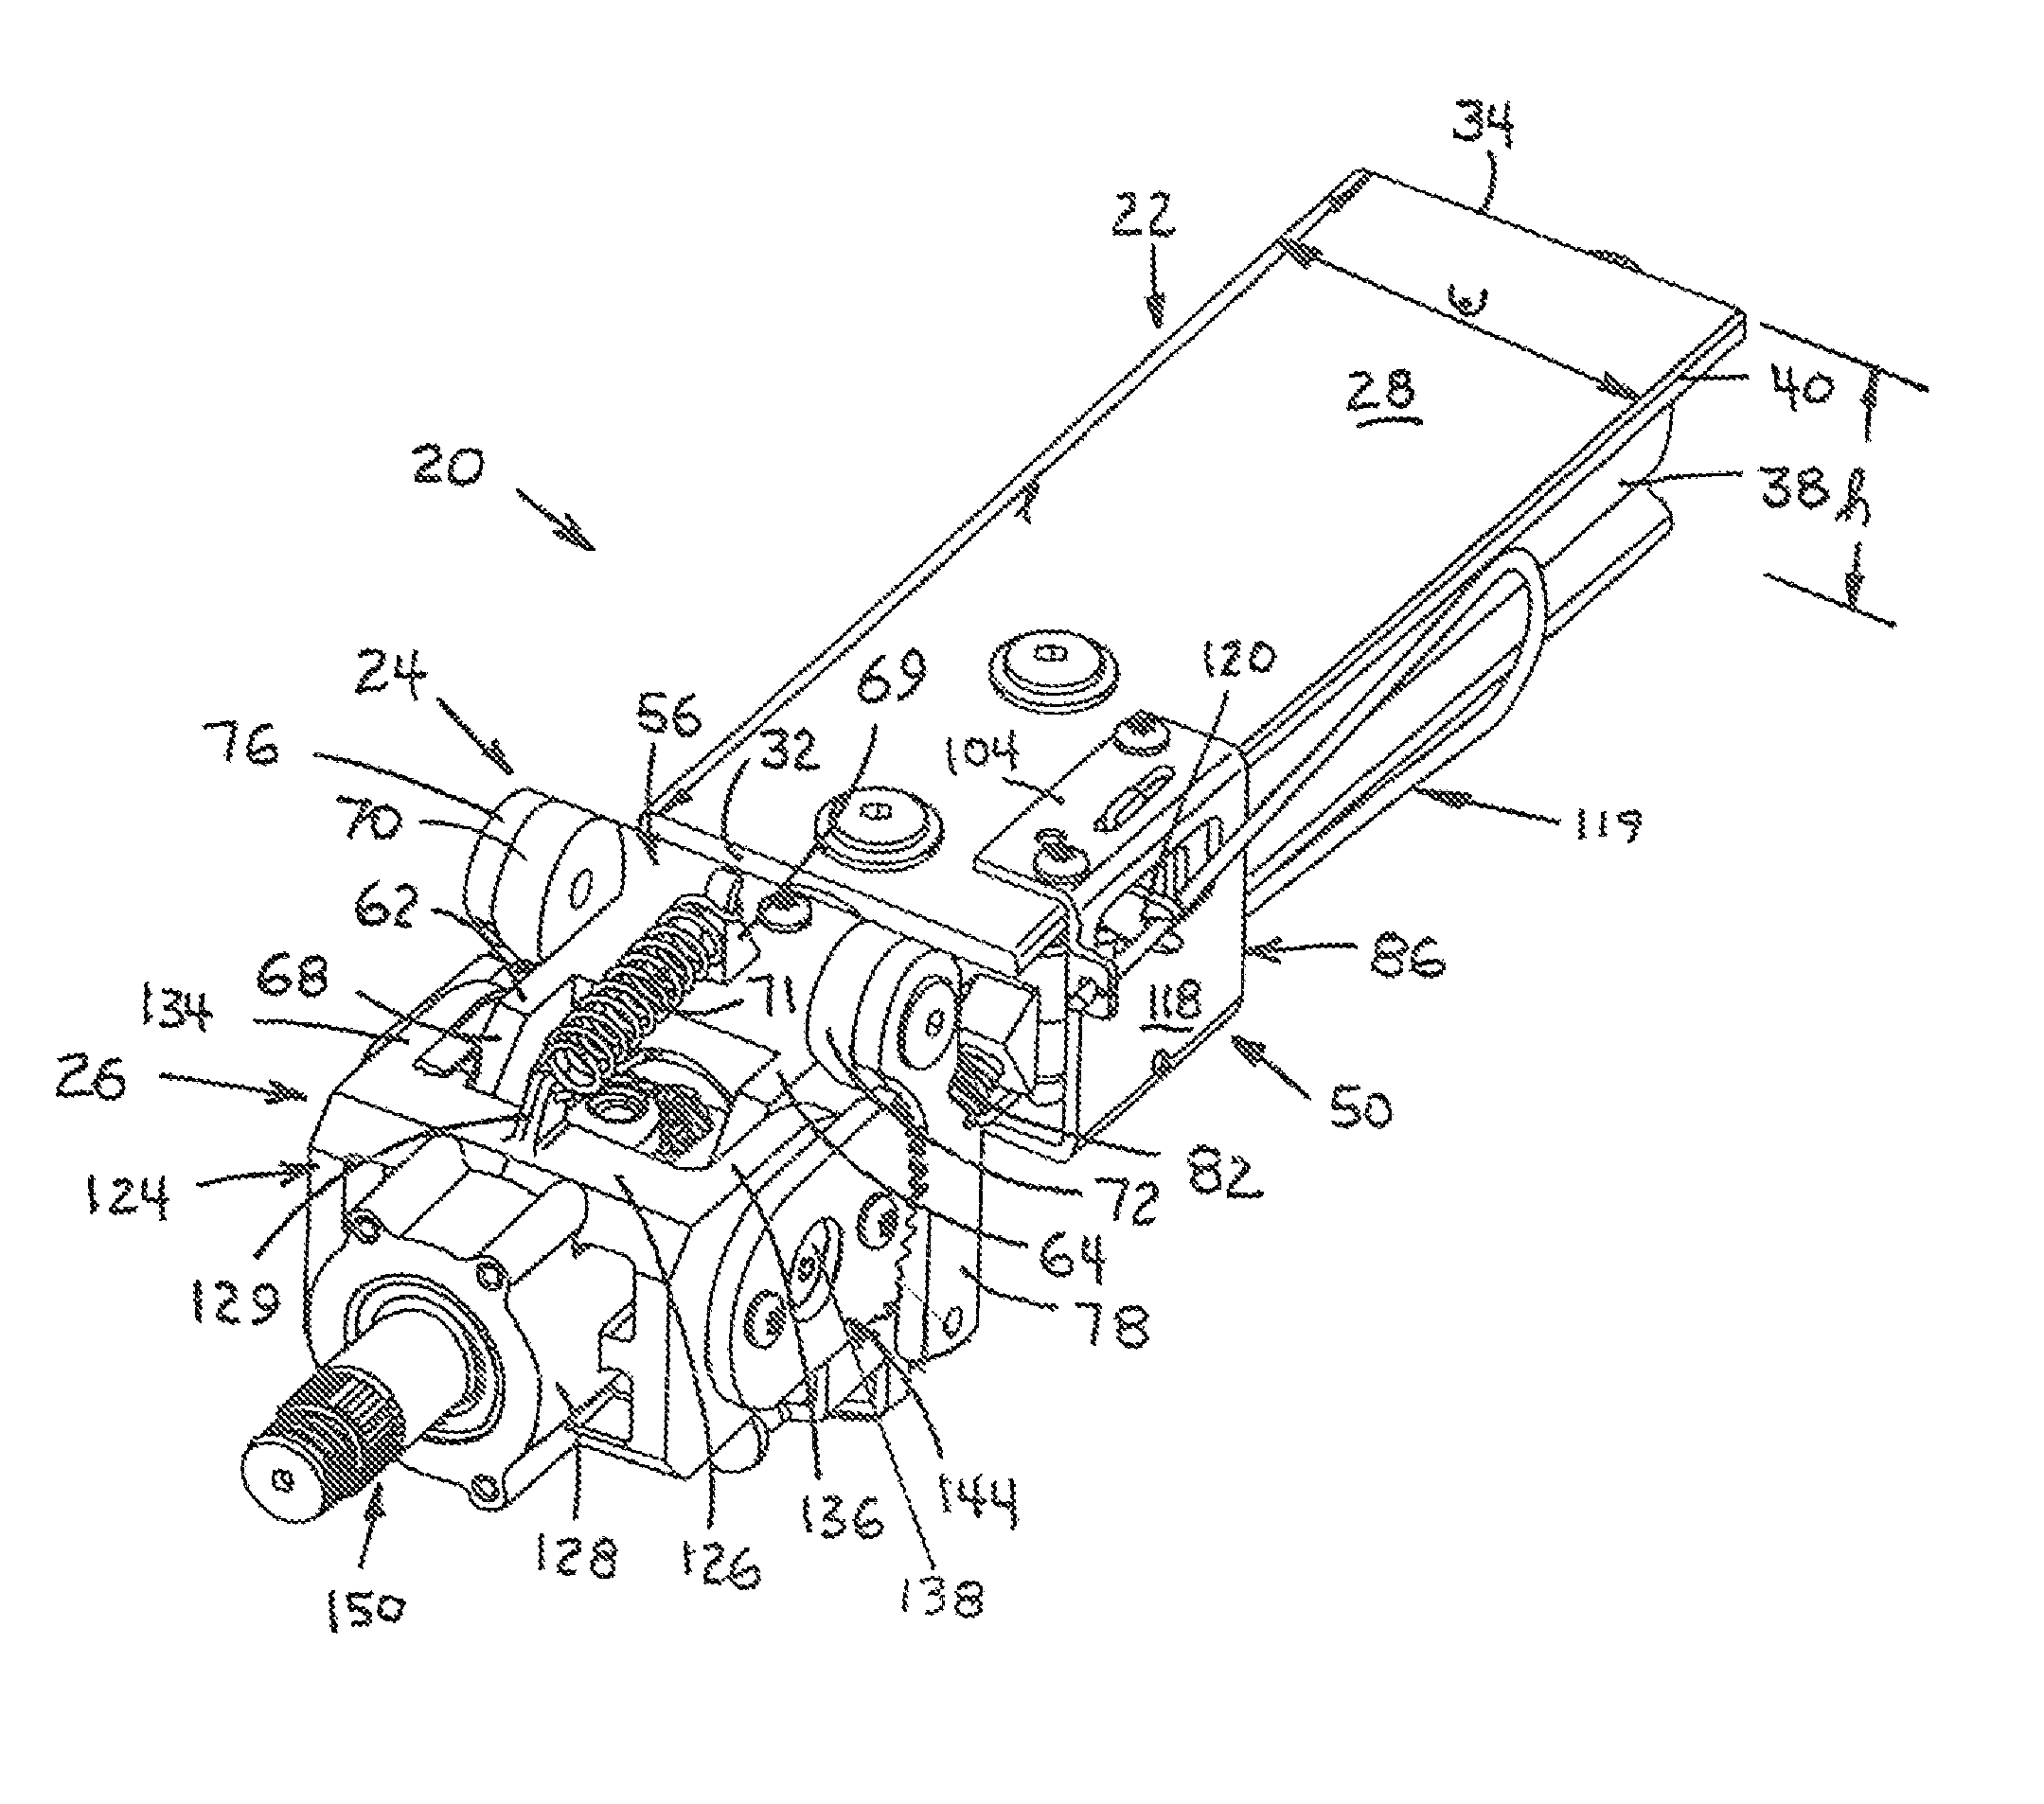 Tilting and telescoping steering column assembly